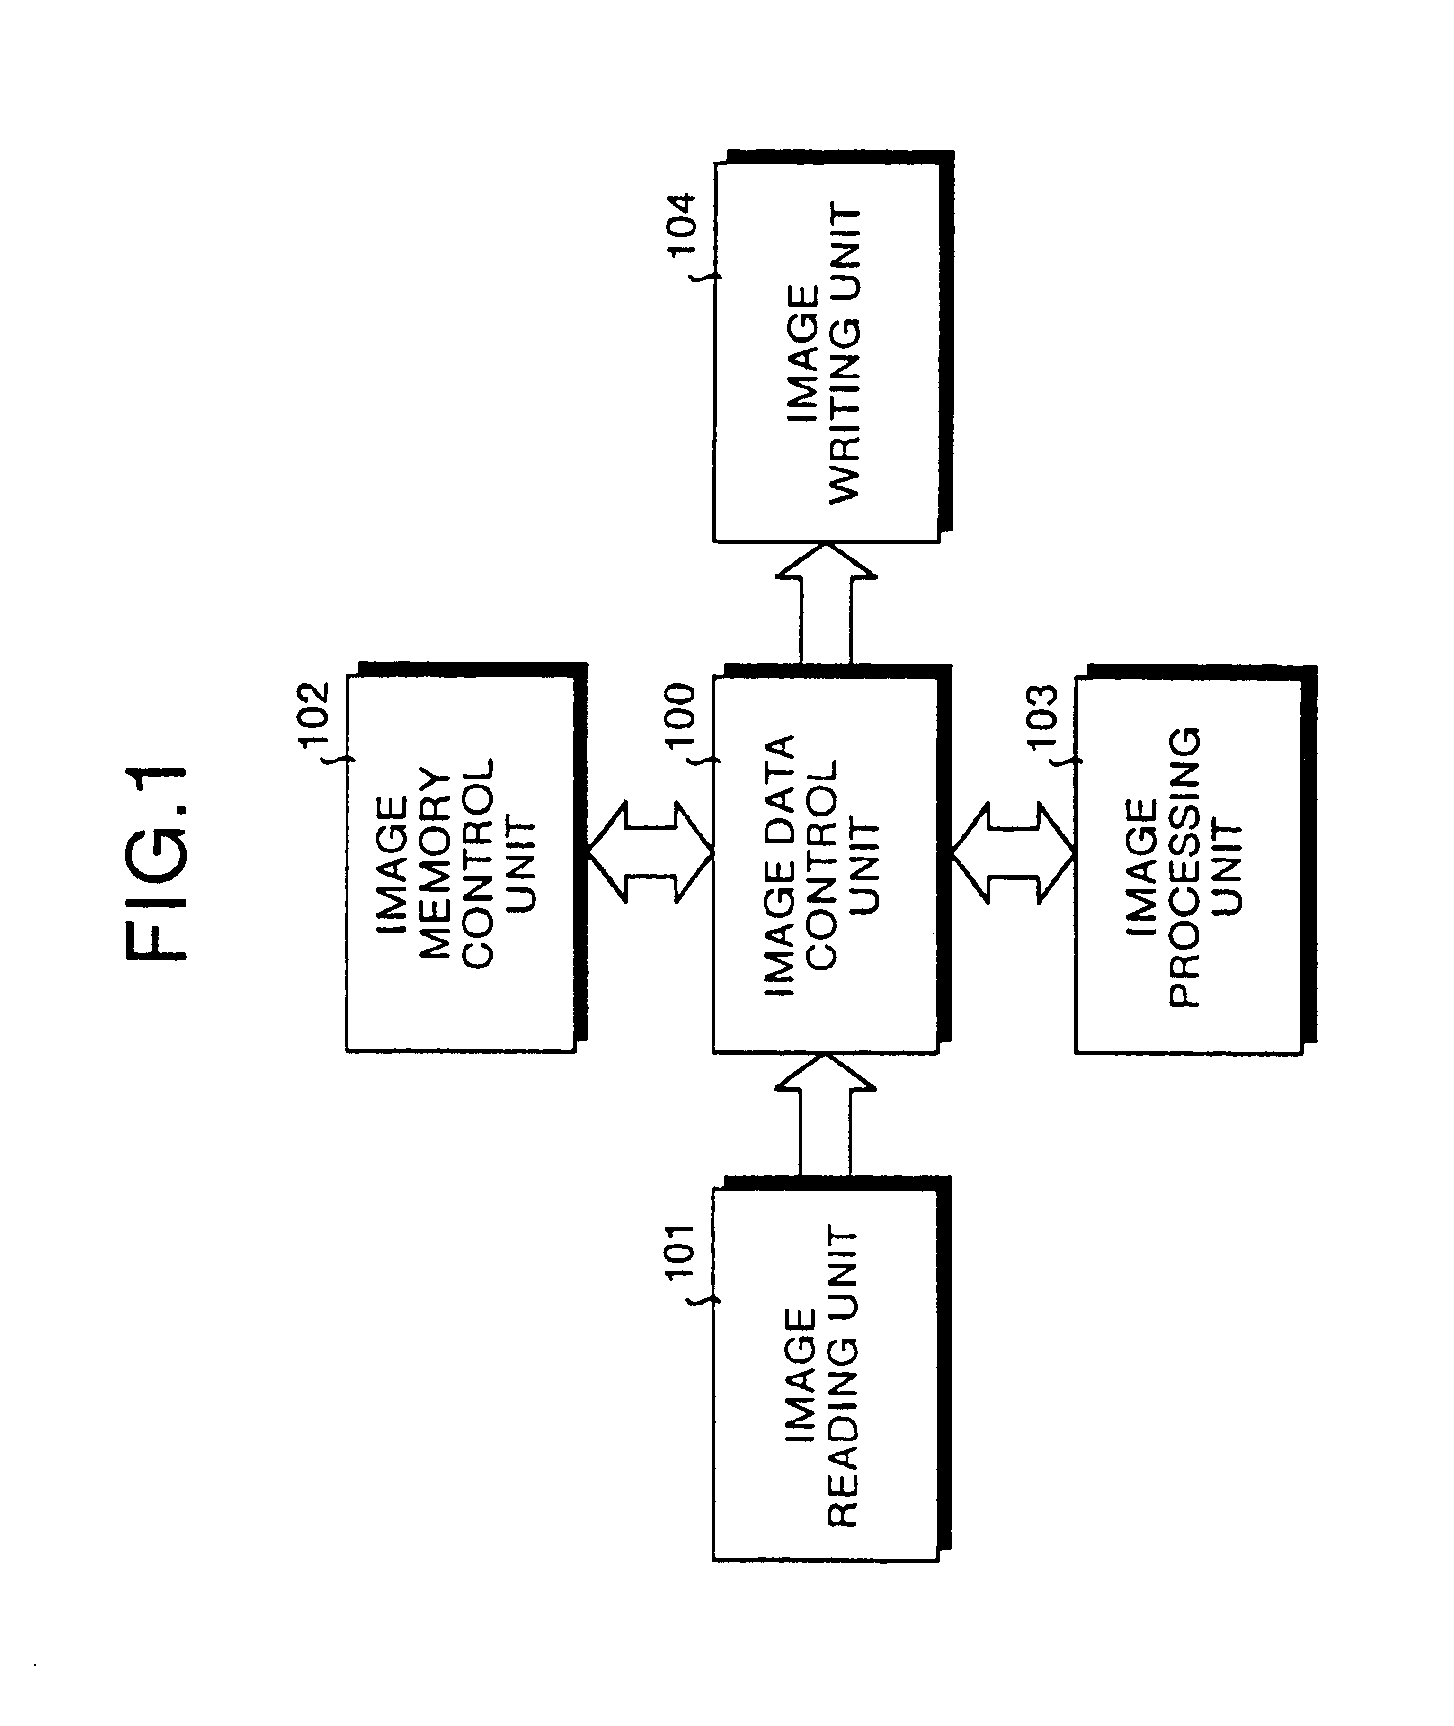 Image processing apparatus, method for adding or updating sequence of image processing and data for image processing in the image processing apparatus, and computer-readable recording medium where program for making computer execute the method is recorded